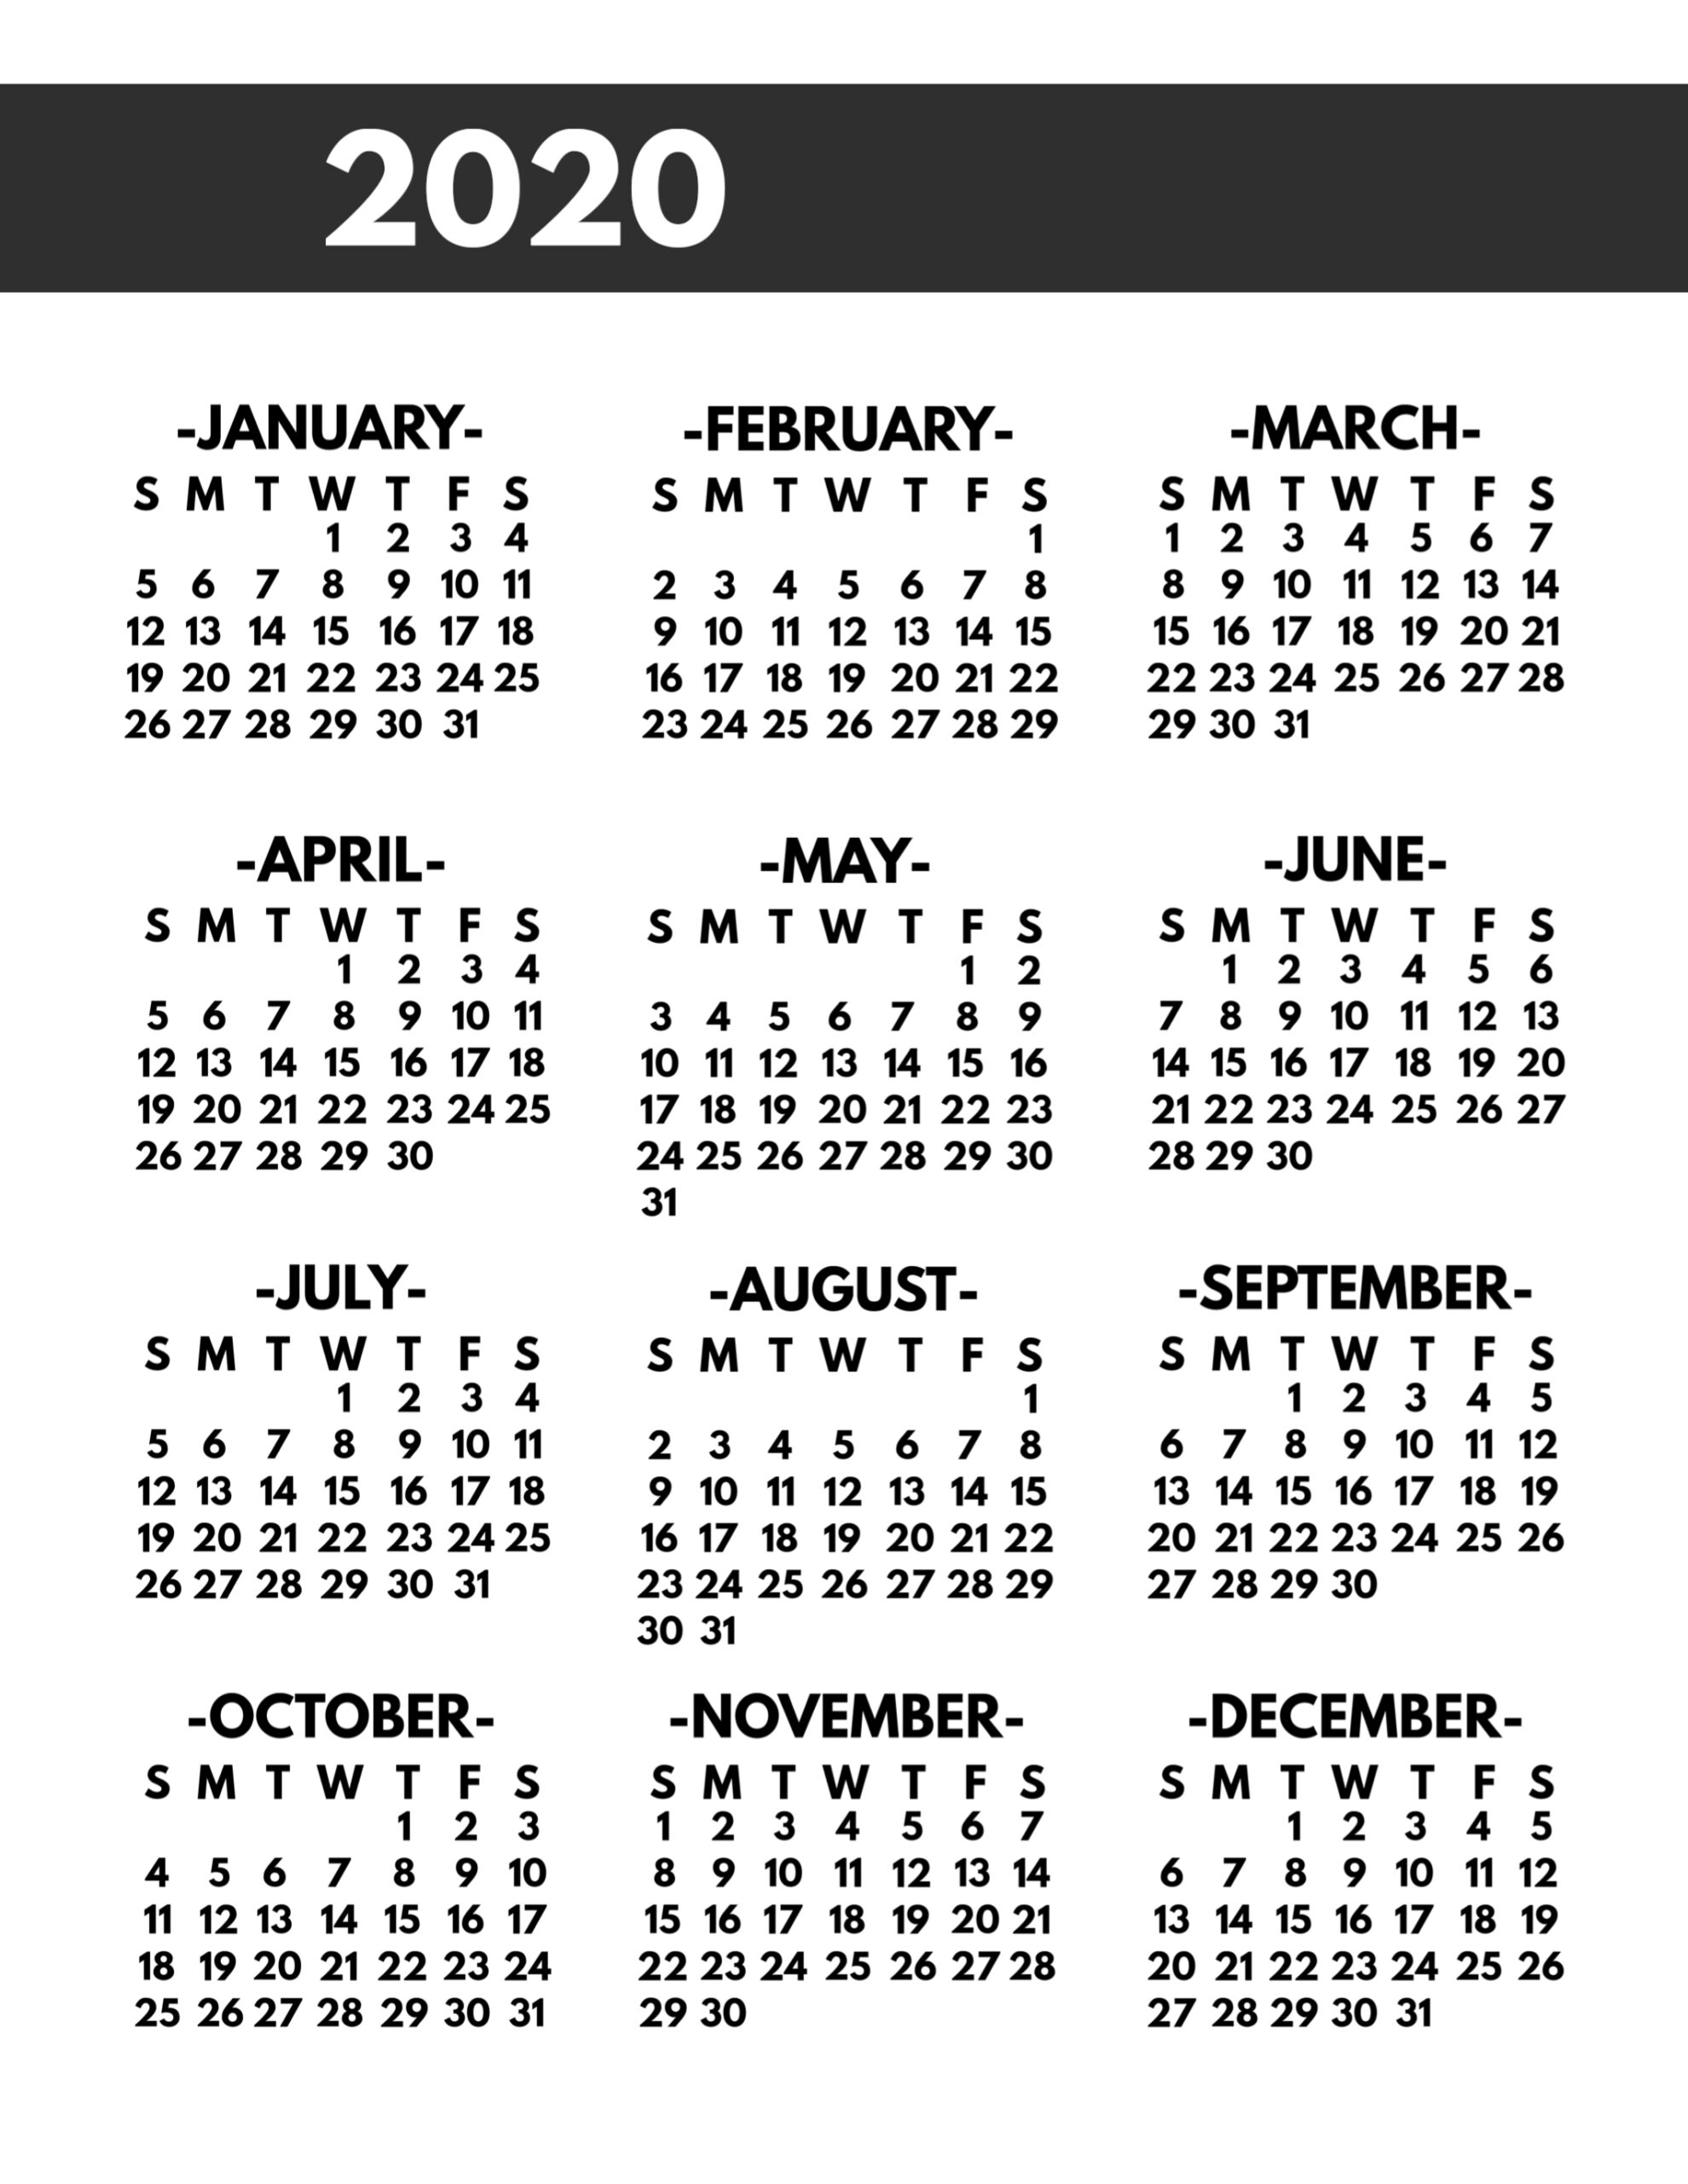 2020 Printable One Page Year At A Glance Calendar - Paper within Year At A Glance Calendar 2020 Free